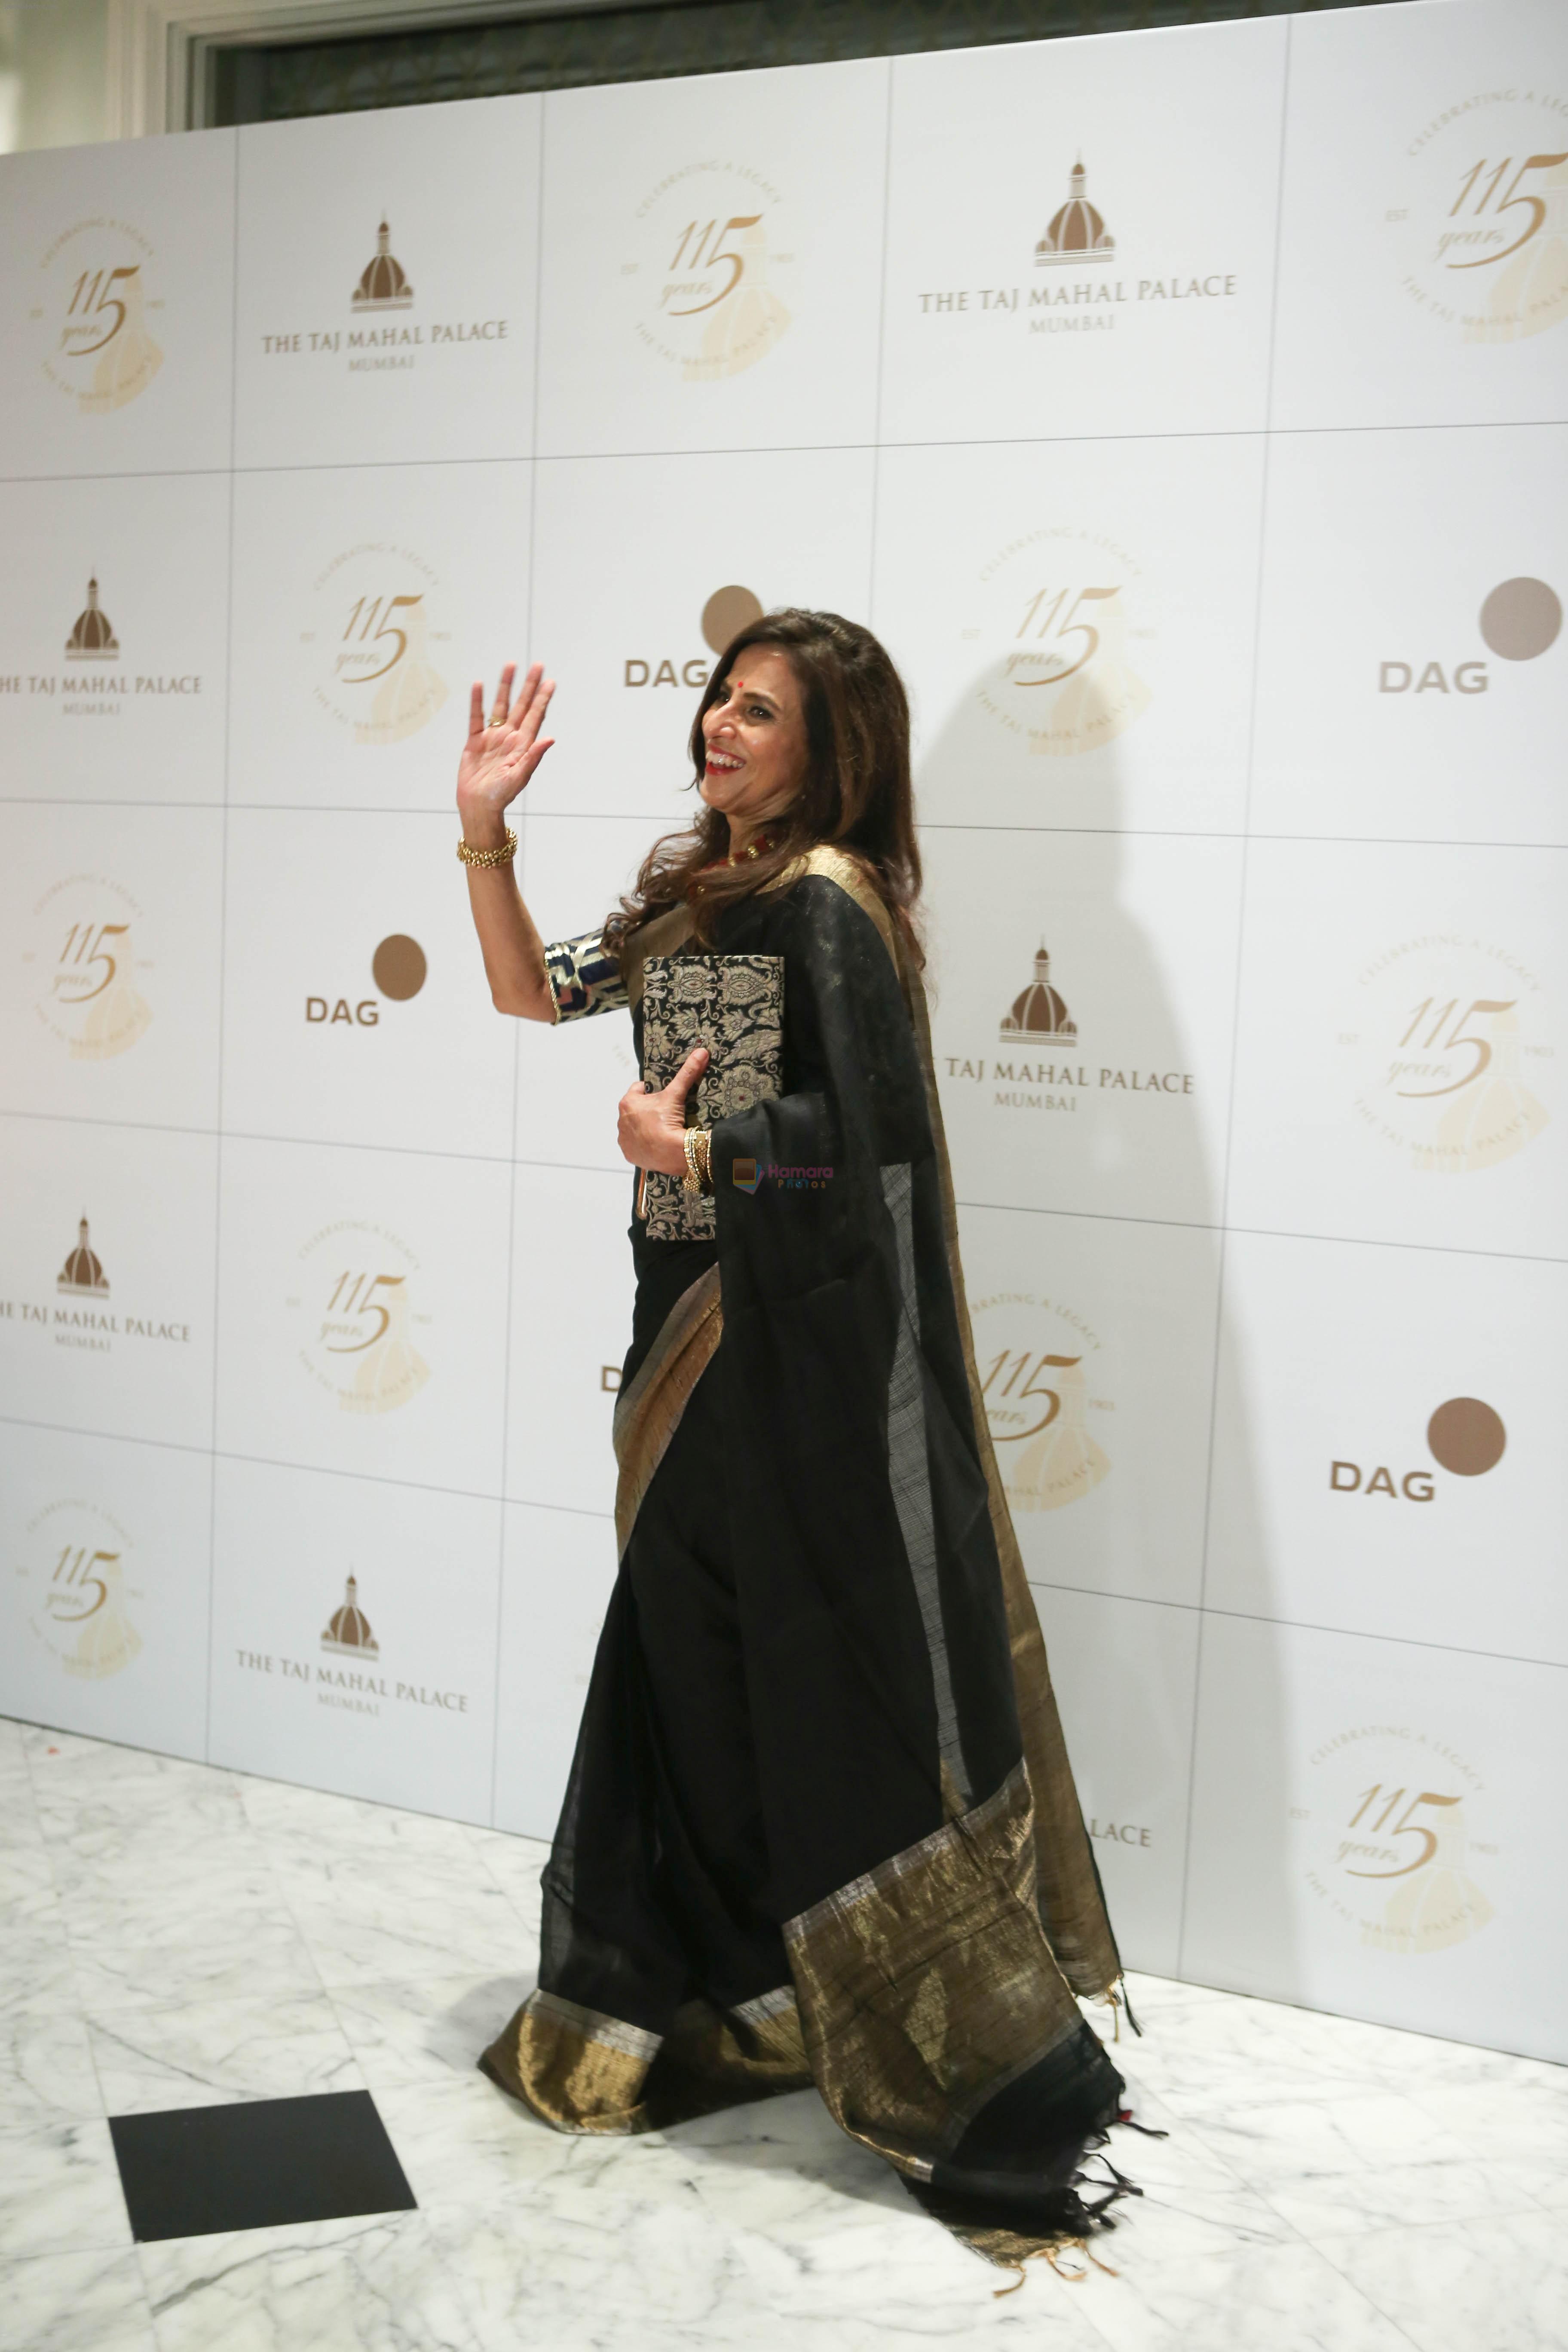 Shobhaa De attends the 115th anniversary celebration of Taj Mahal Palace which was celebrated with A Black Tie Charity Ball in mumbai on 15th Dec 2018